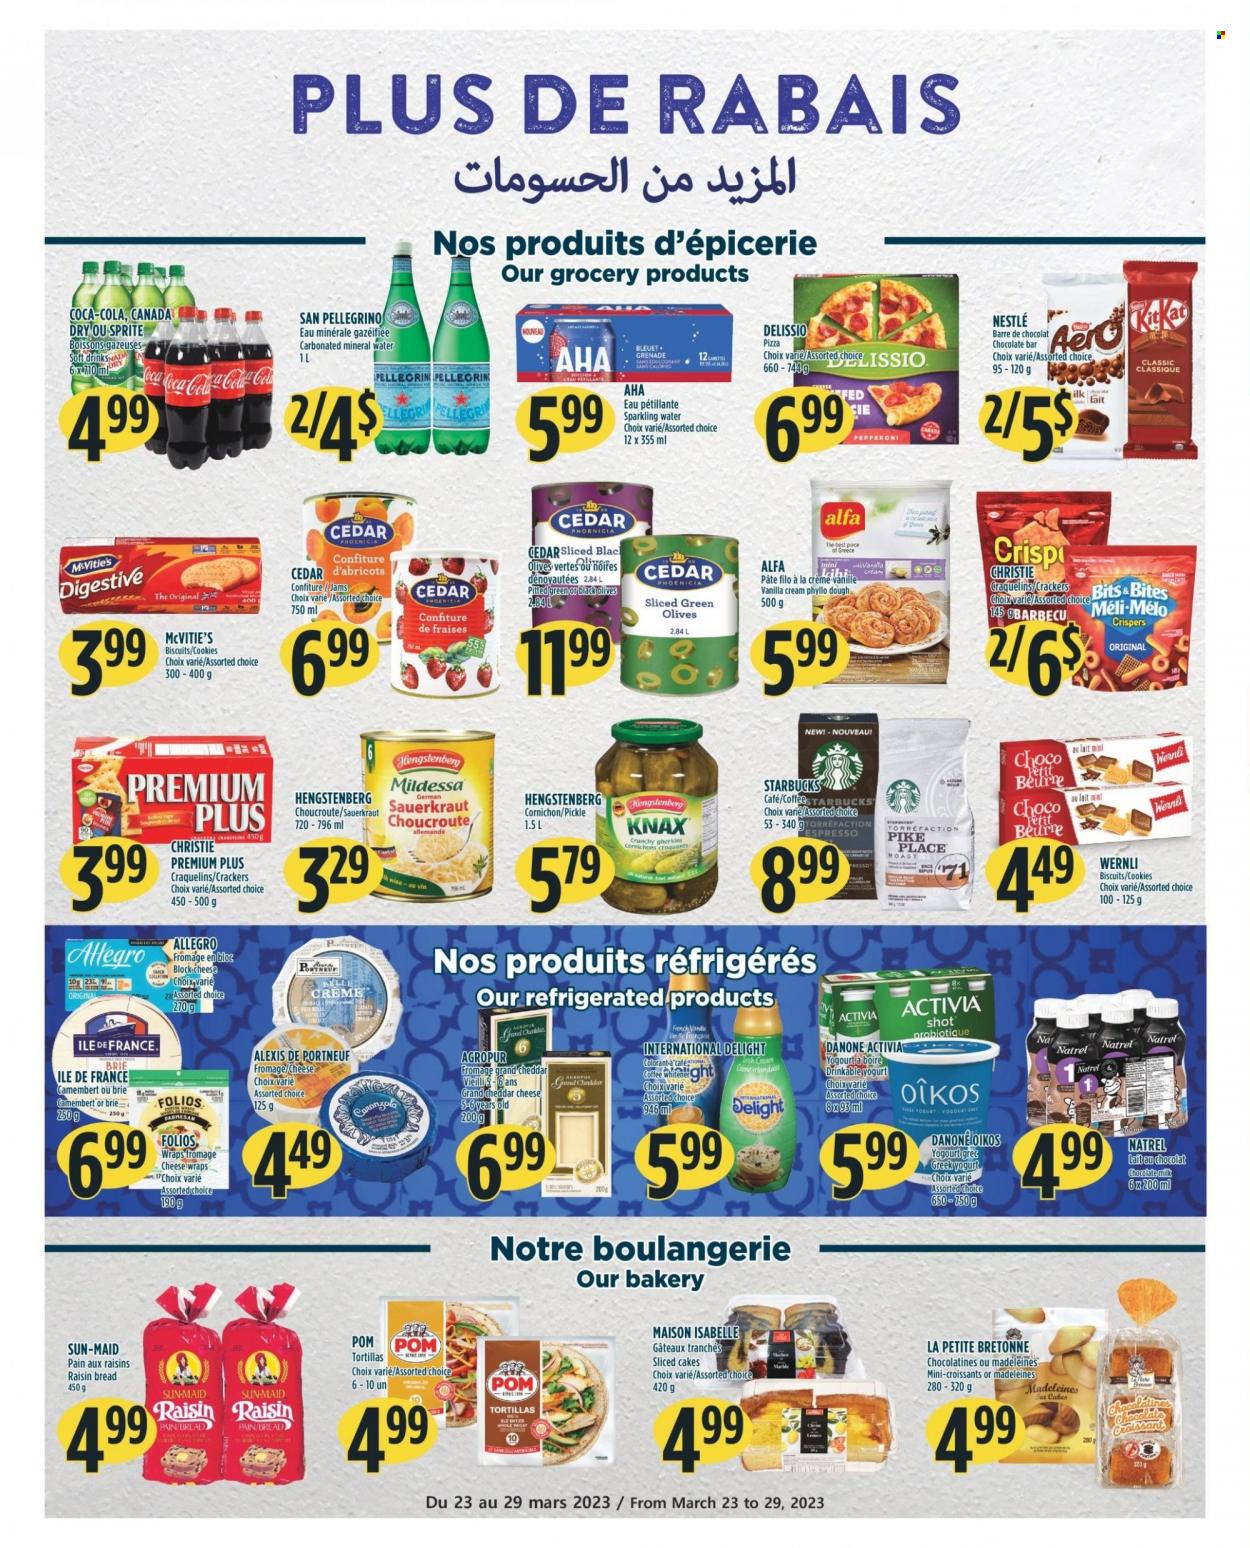 thumbnail - Adonis Flyer - March 23, 2023 - March 29, 2023 - Sales products - bread, tortillas, cake, croissant, wraps, pizza, cheddar, cheese, brie, greek yoghurt, yoghurt, Activia, Oikos, filo dough, cookies, Mars, crackers, biscuit, Digestive, chocolate bar, sauerkraut, dried fruit, Canada Dry, Coca-Cola, Sprite, soft drink, mineral water, sparkling water, San Pellegrino, water, coffee, Starbucks, camembert, Nestlé, raisins, olives, Danone. Page 7.